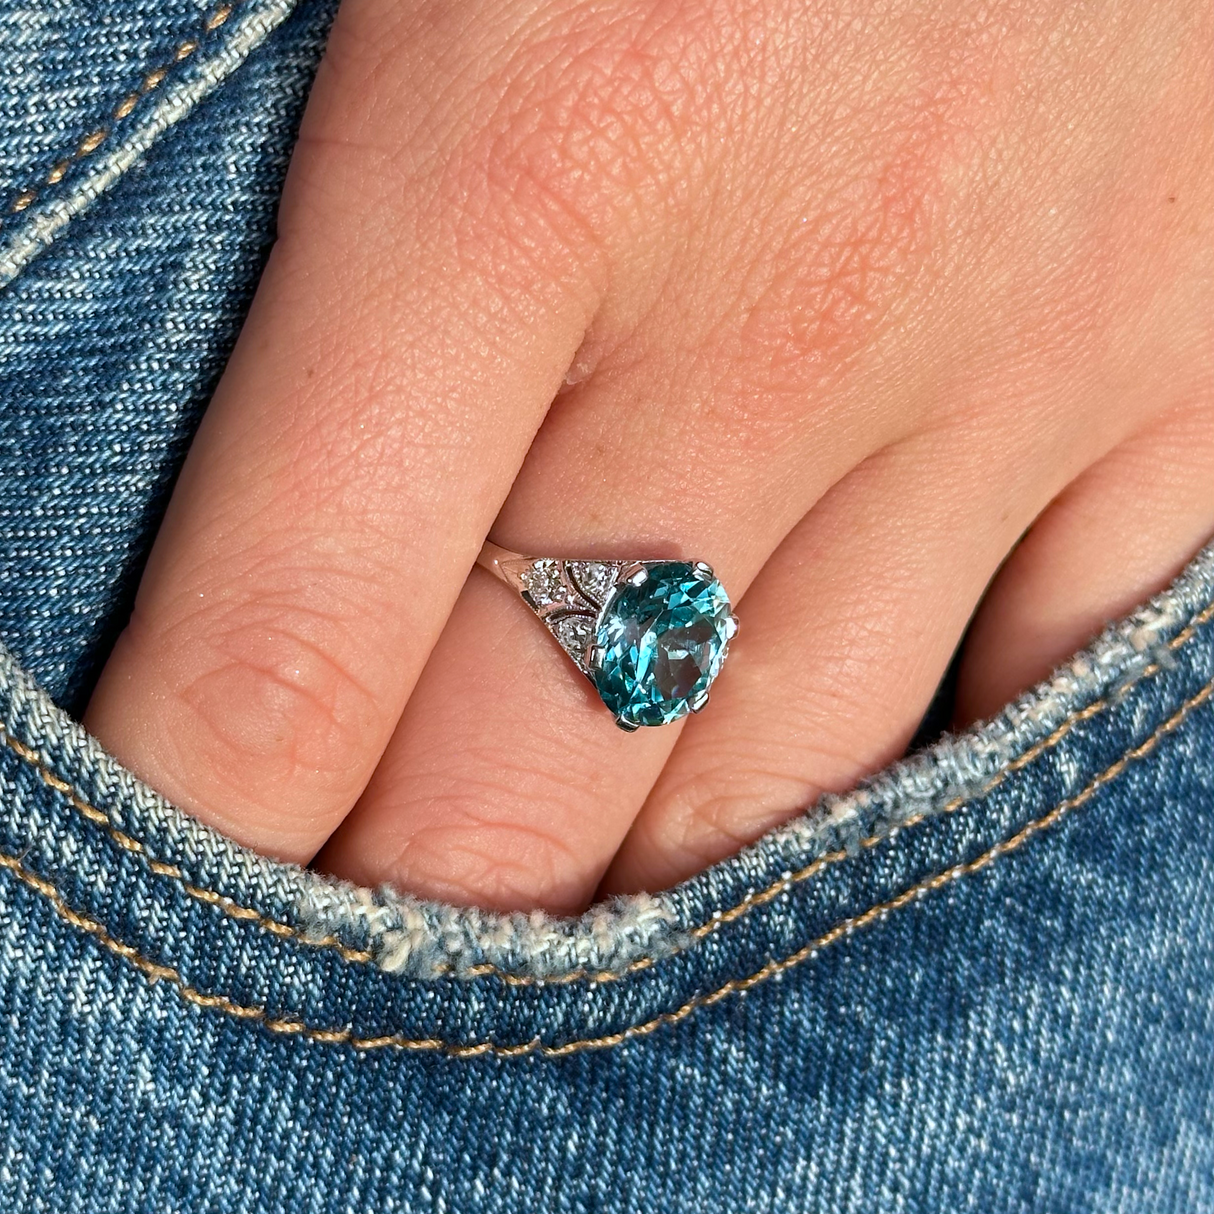 Art deco zircon and diamond ring worn on hand in pocket of jeans.